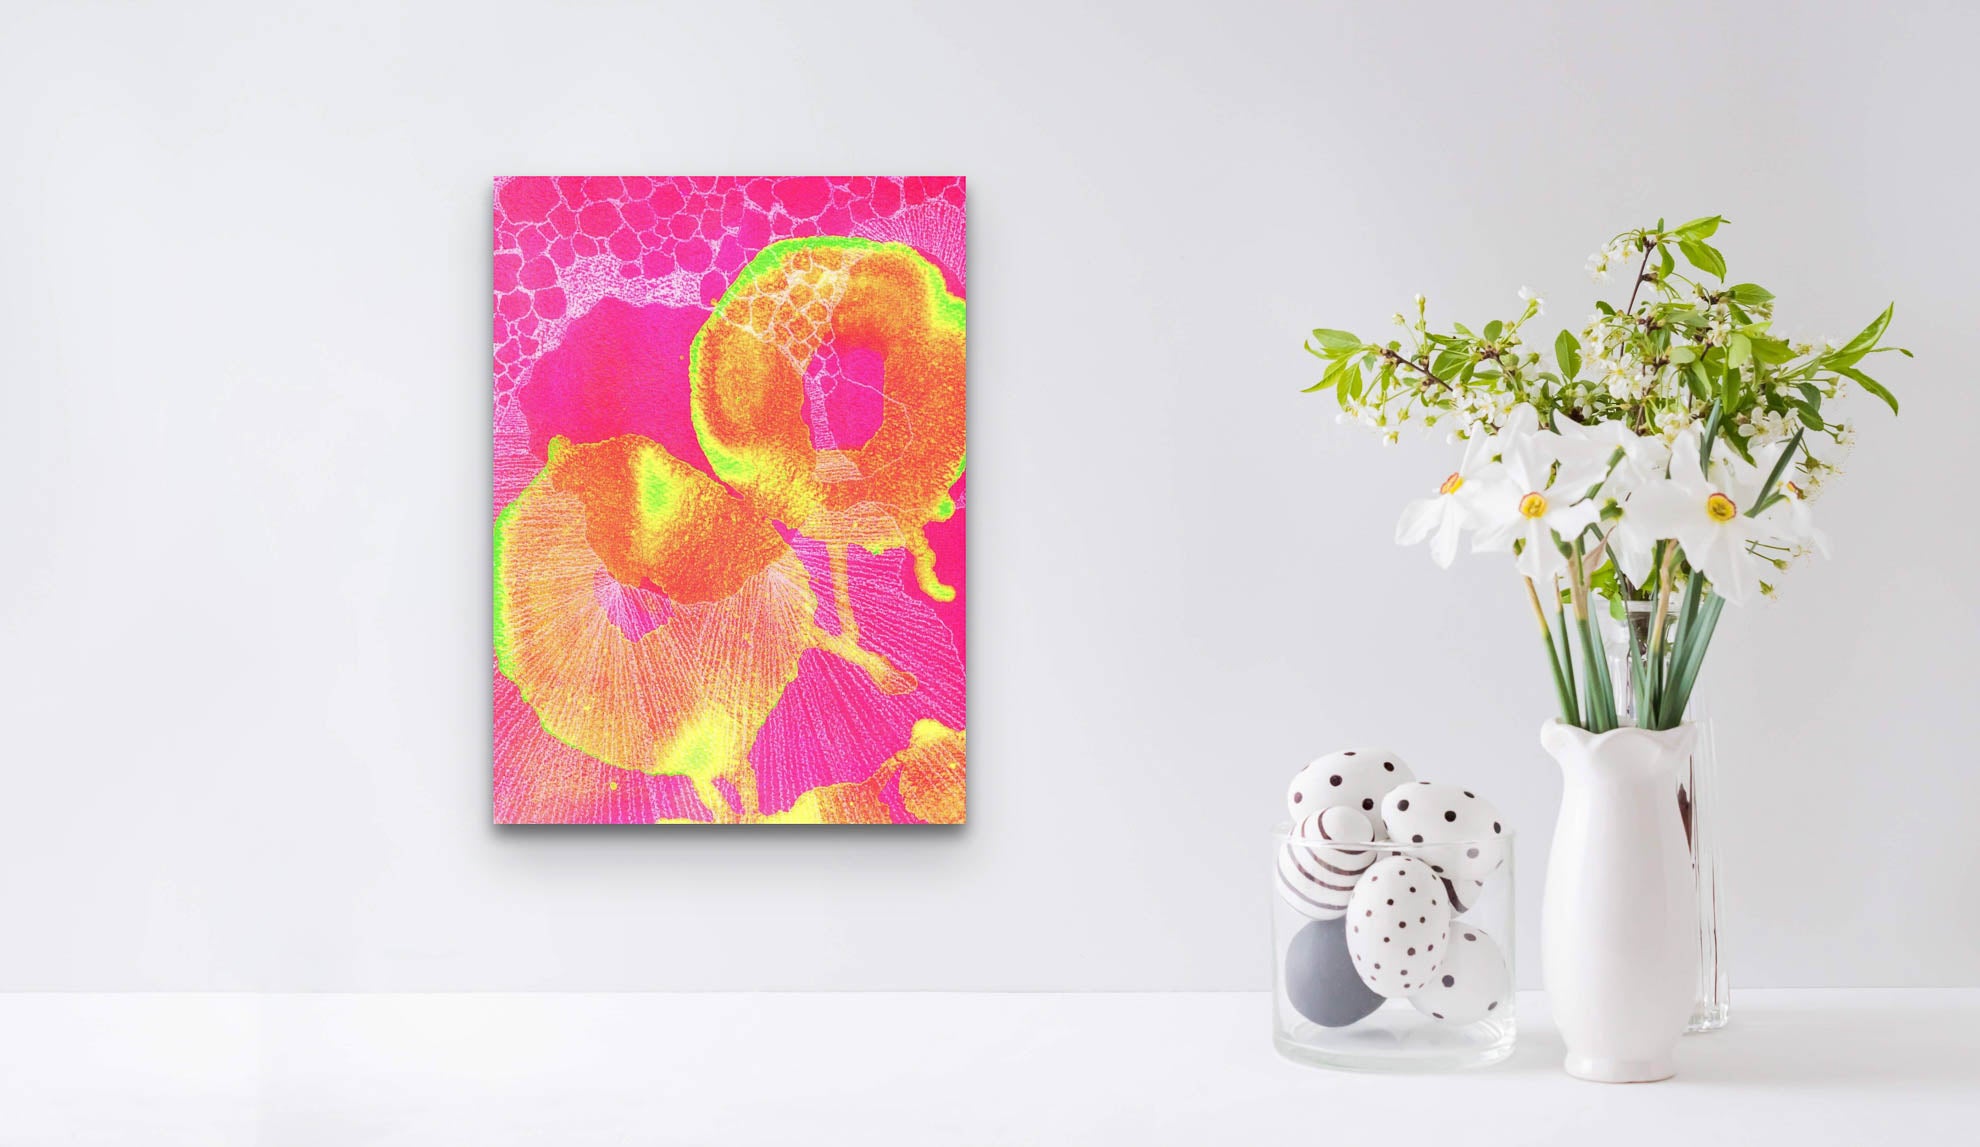 An abstract screen print in bright yellow, pink, green and white shown in a white home space background